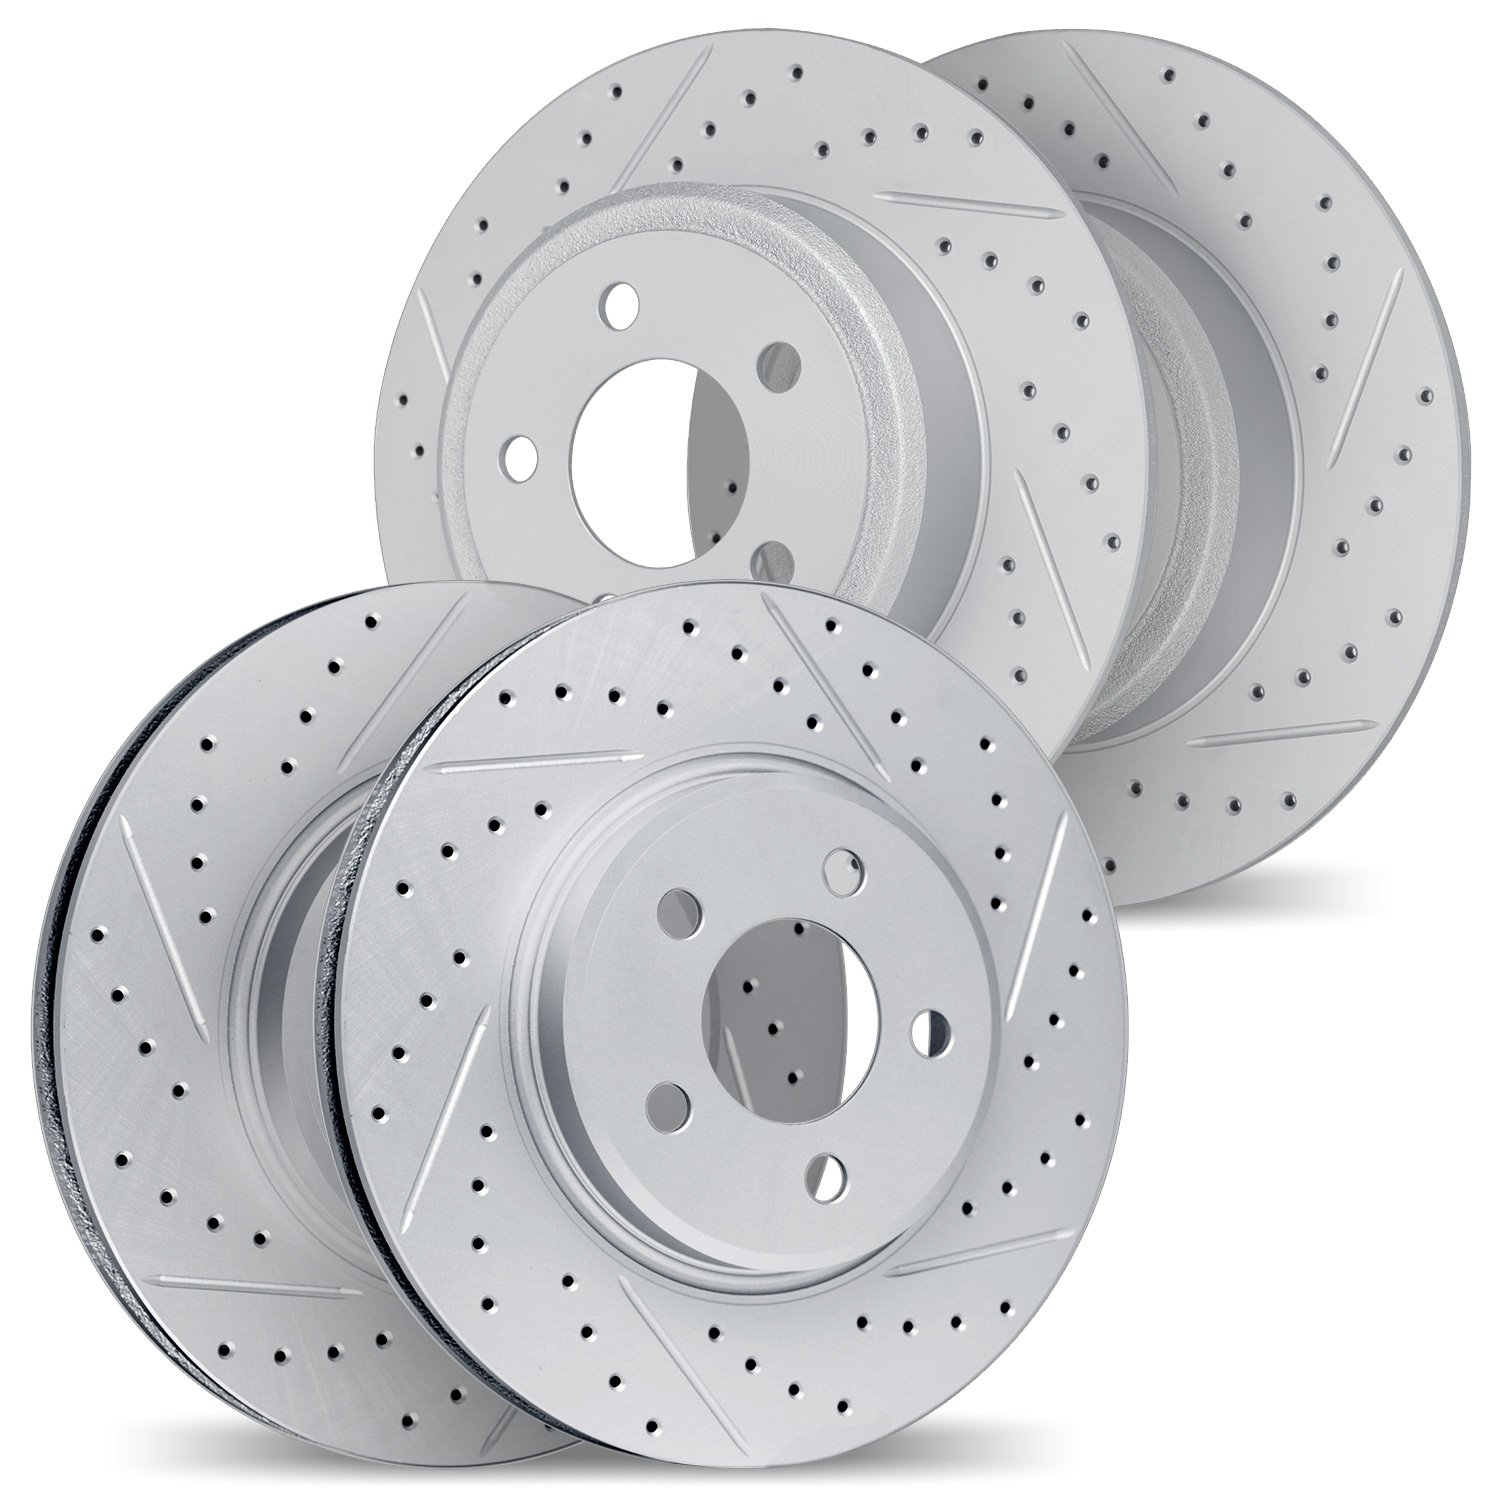 2004-03027 Geoperformance Drilled/Slotted Brake Rotors, 2010-2016 Kia/Hyundai/Genesis, Position: Front and Rear